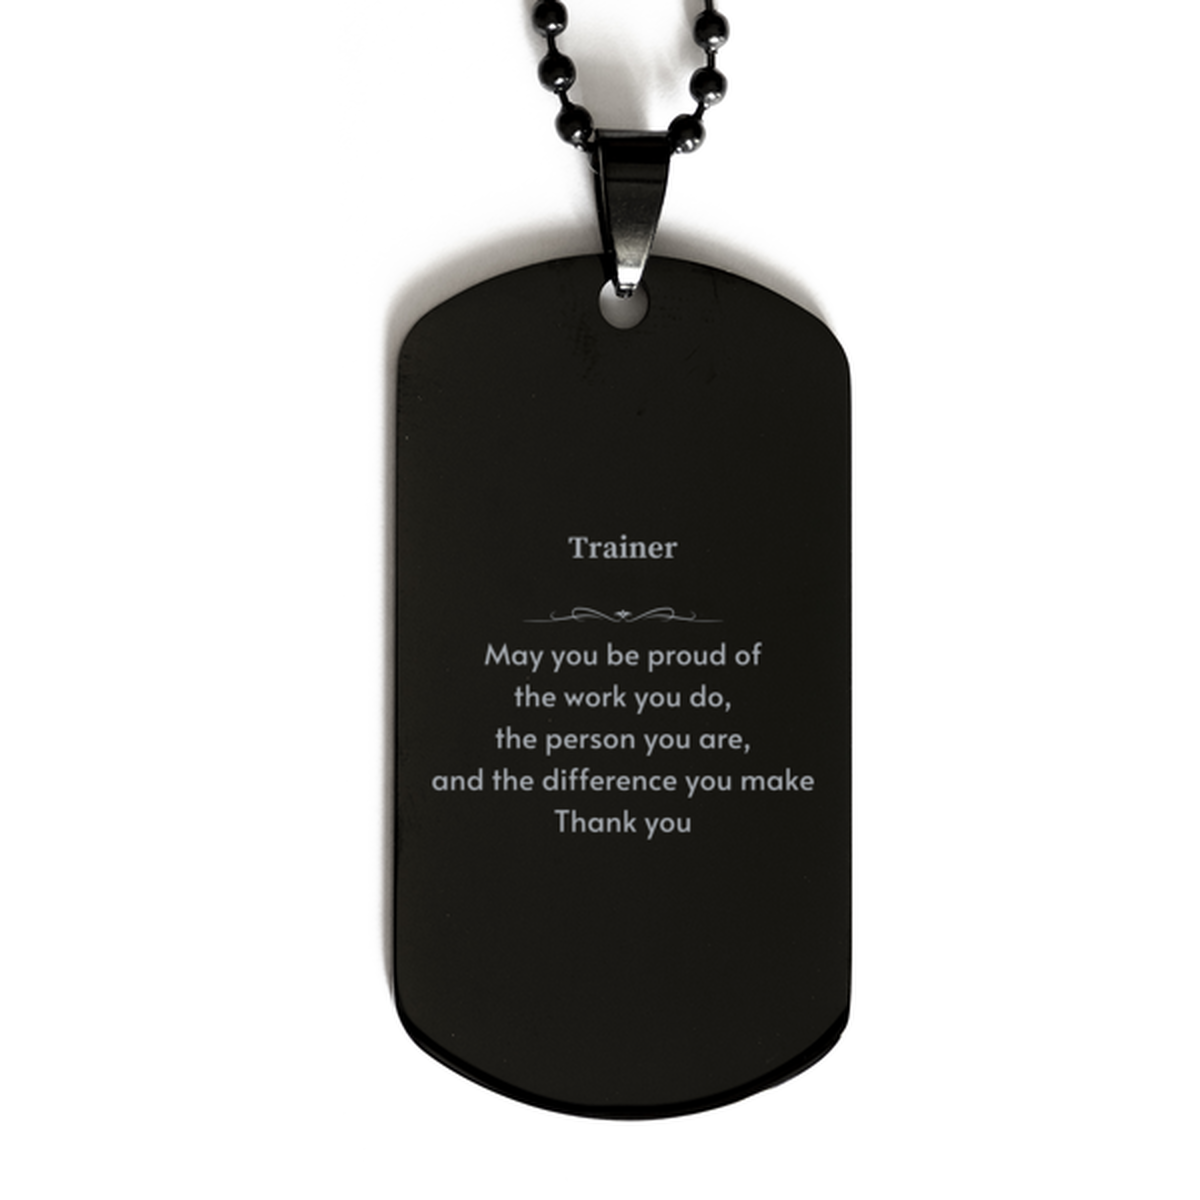 Heartwarming Black Dog Tag Retirement Coworkers Gifts for Trainer, Trainer May You be proud of the work you do, the person you are Gifts for Boss Men Women Friends